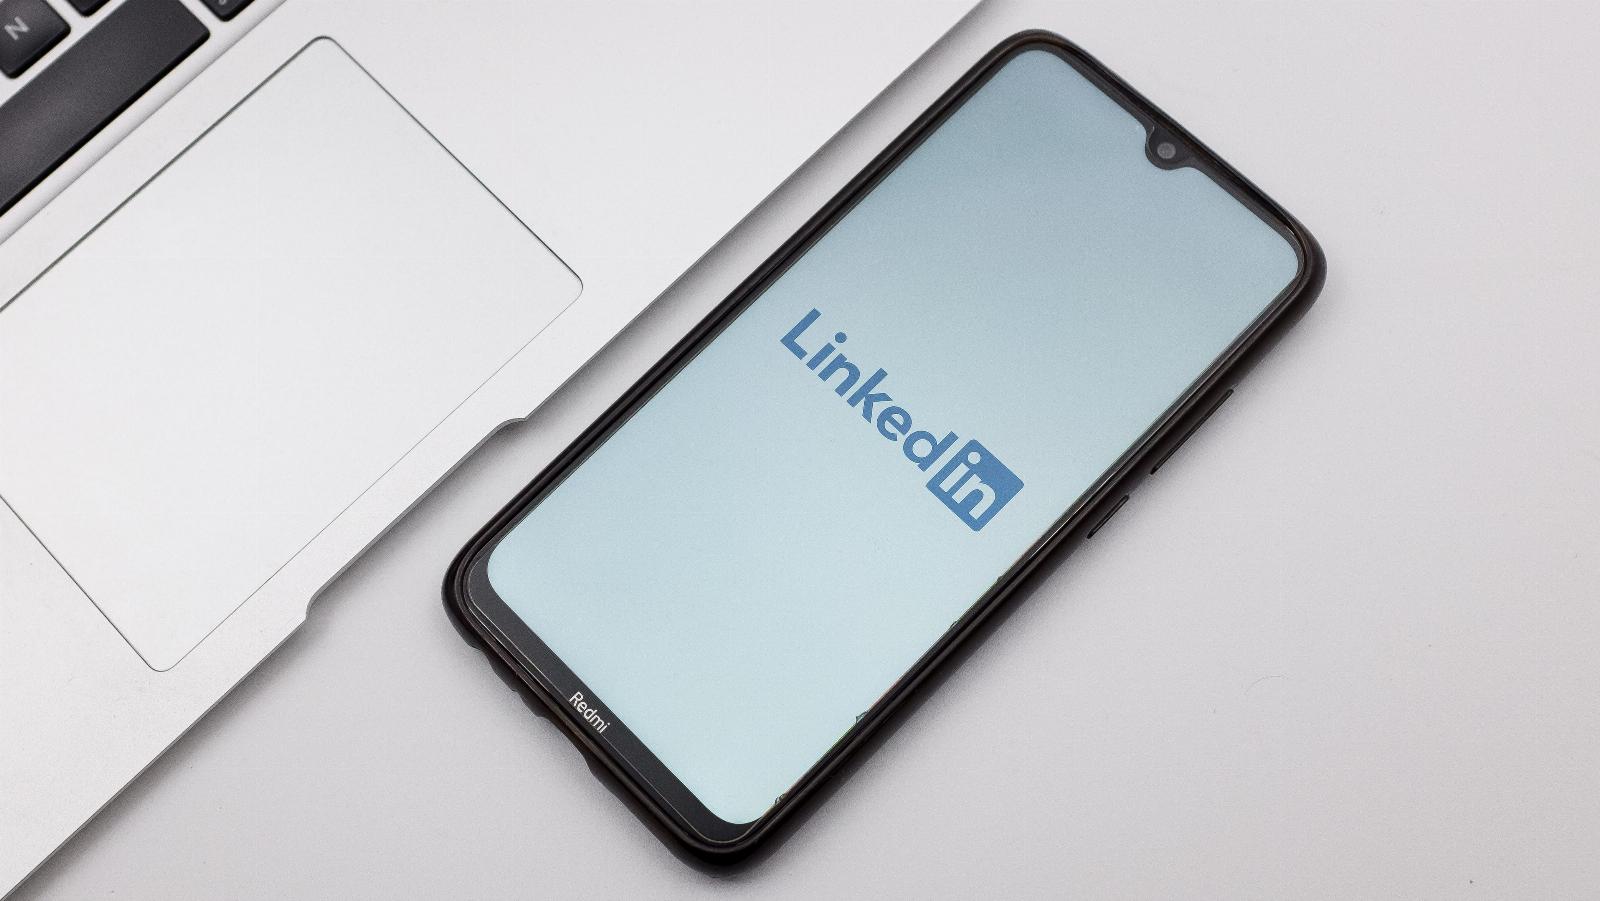 LinkedIn is experimenting with a TikTok-like video feed in its app